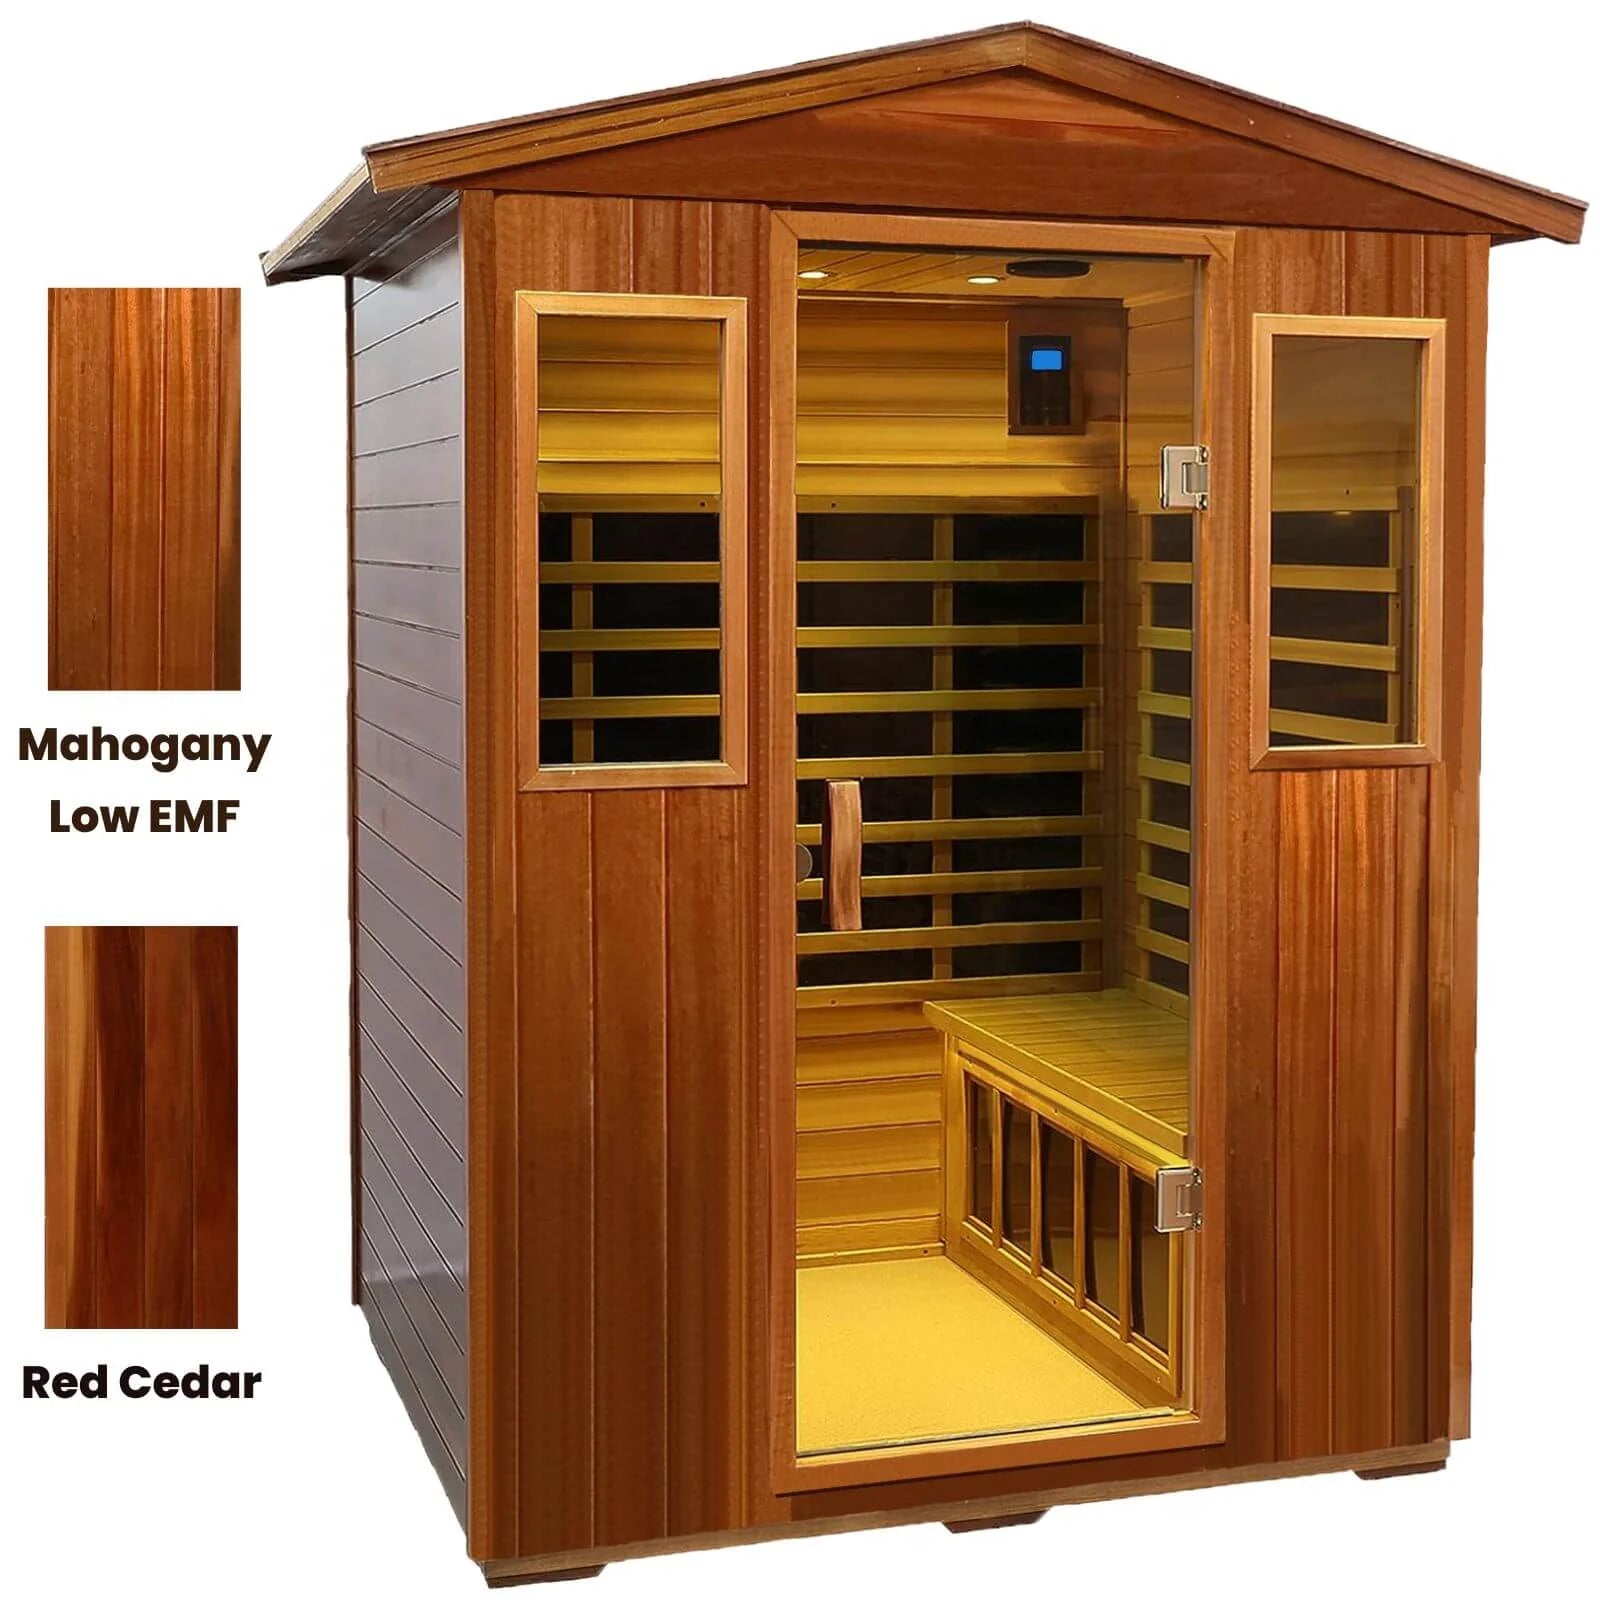 Queen TS IV  4 Person Ultra Low EMF Outdoor Mahogany Infrared Sauna